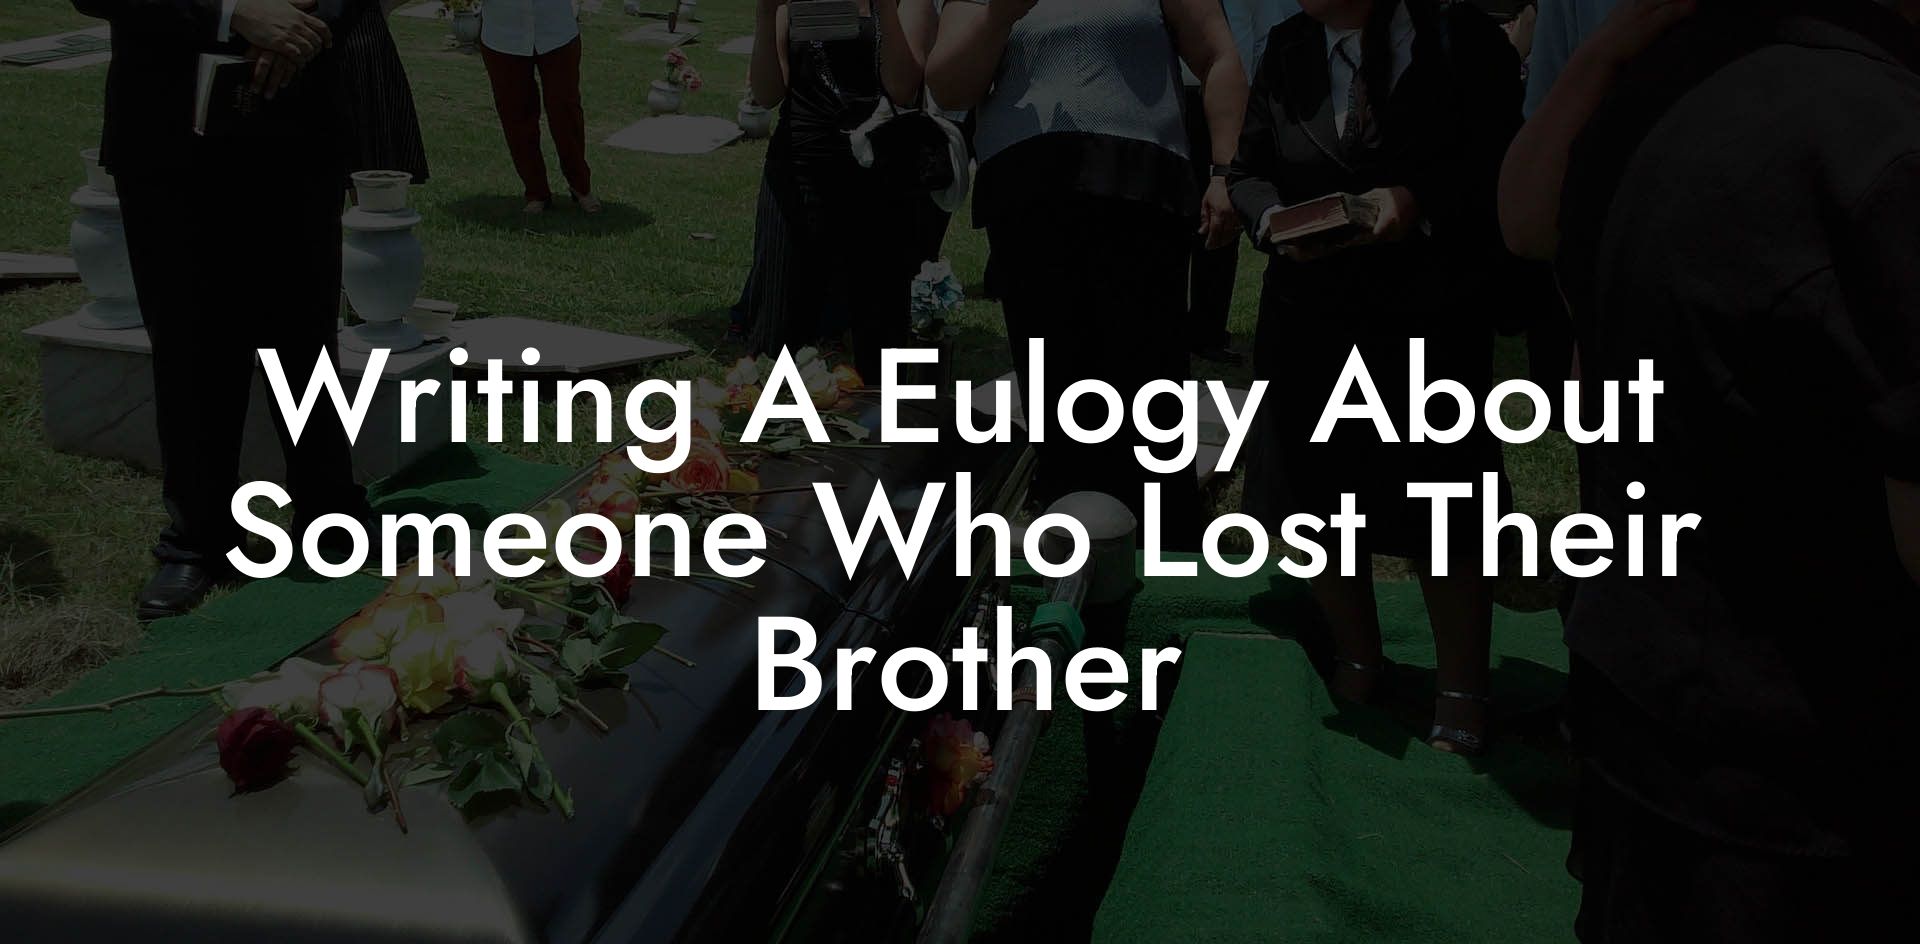 Writing A Eulogy About Someone Who Lost Their Brother